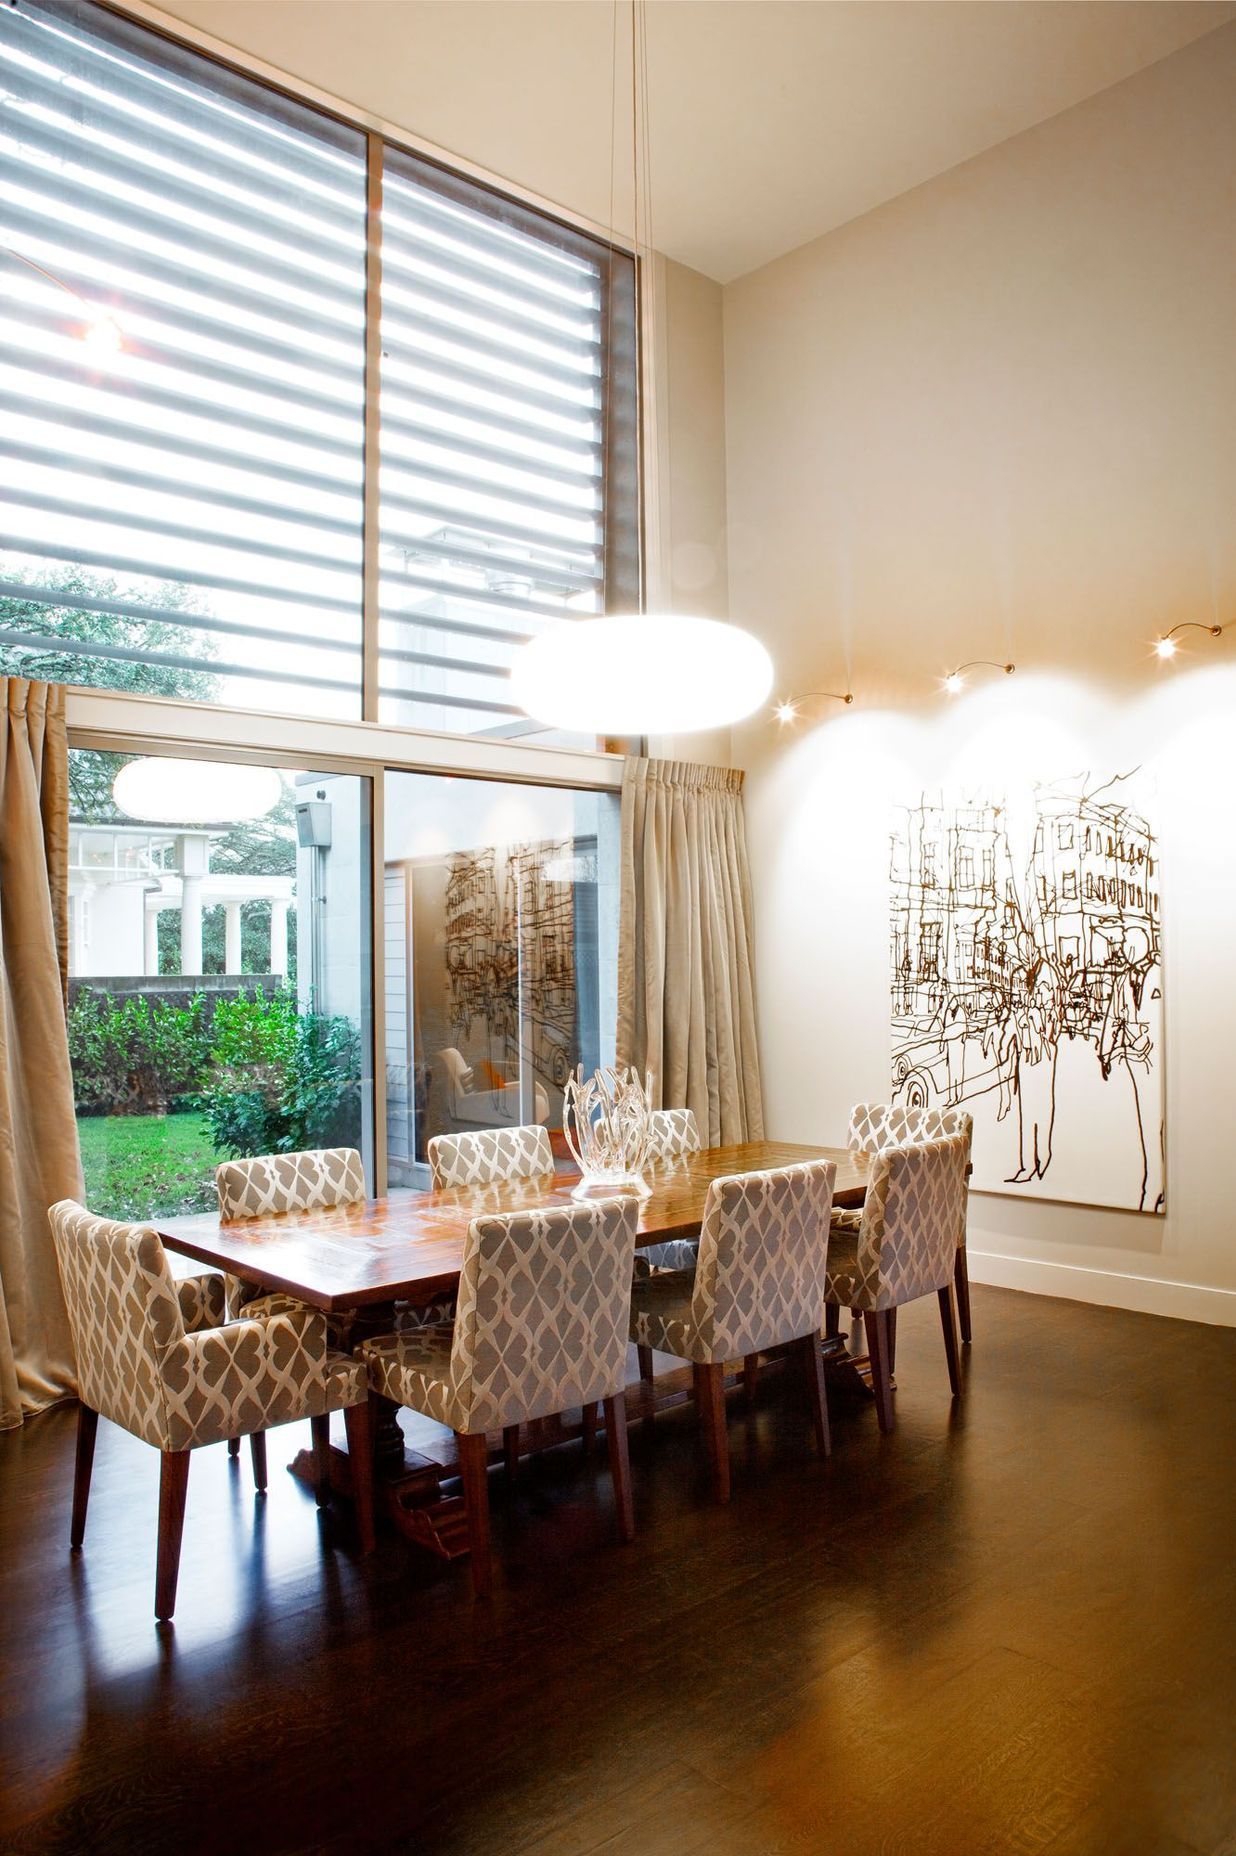 Lighting was a critical element of the bold and open dining space.